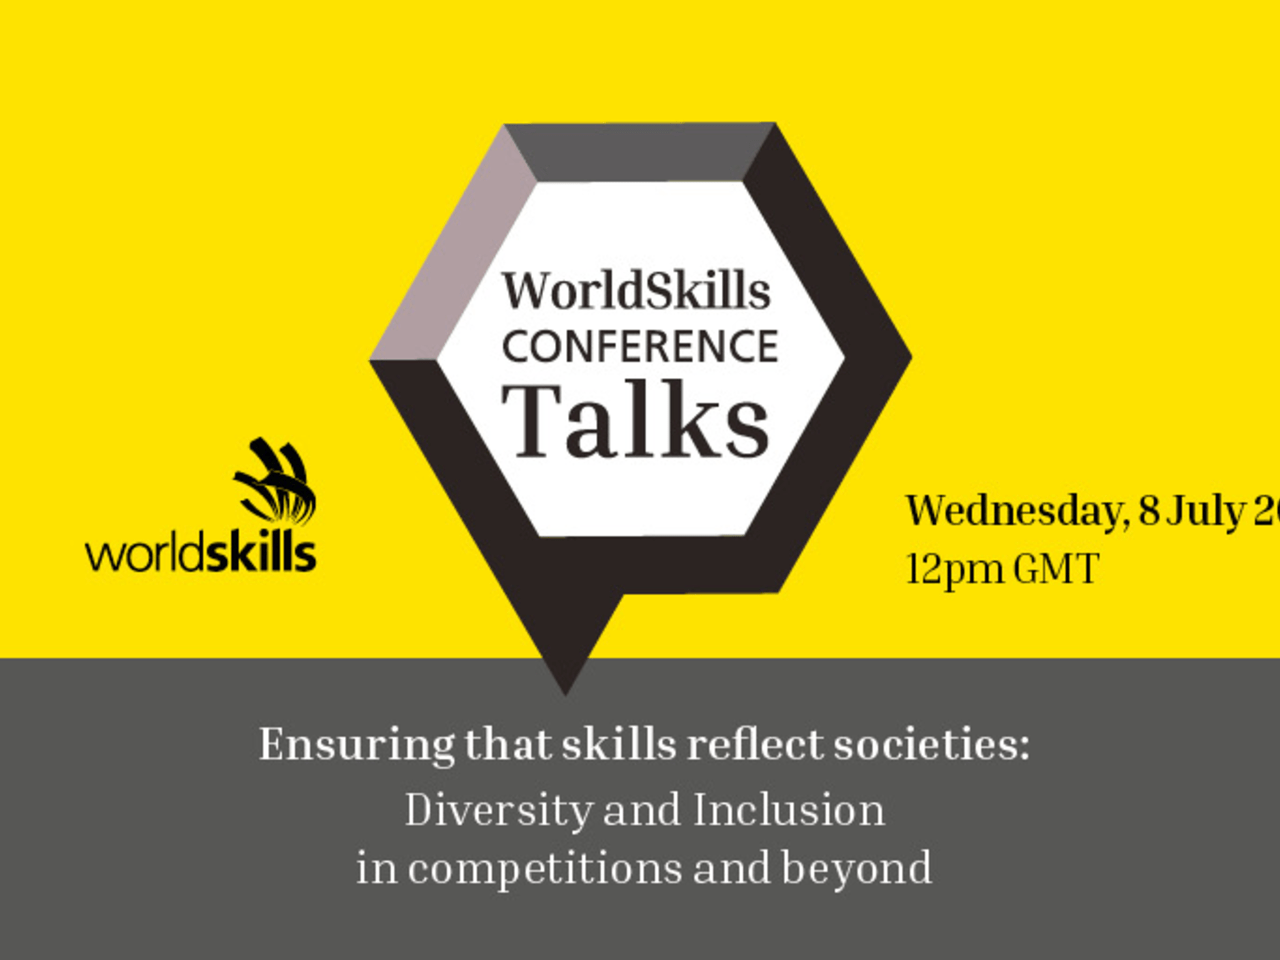 WorldSkills Conference Talk #3 - Ensuring that skills reflect societies: Diversity and Inclusion in competitions and beyond